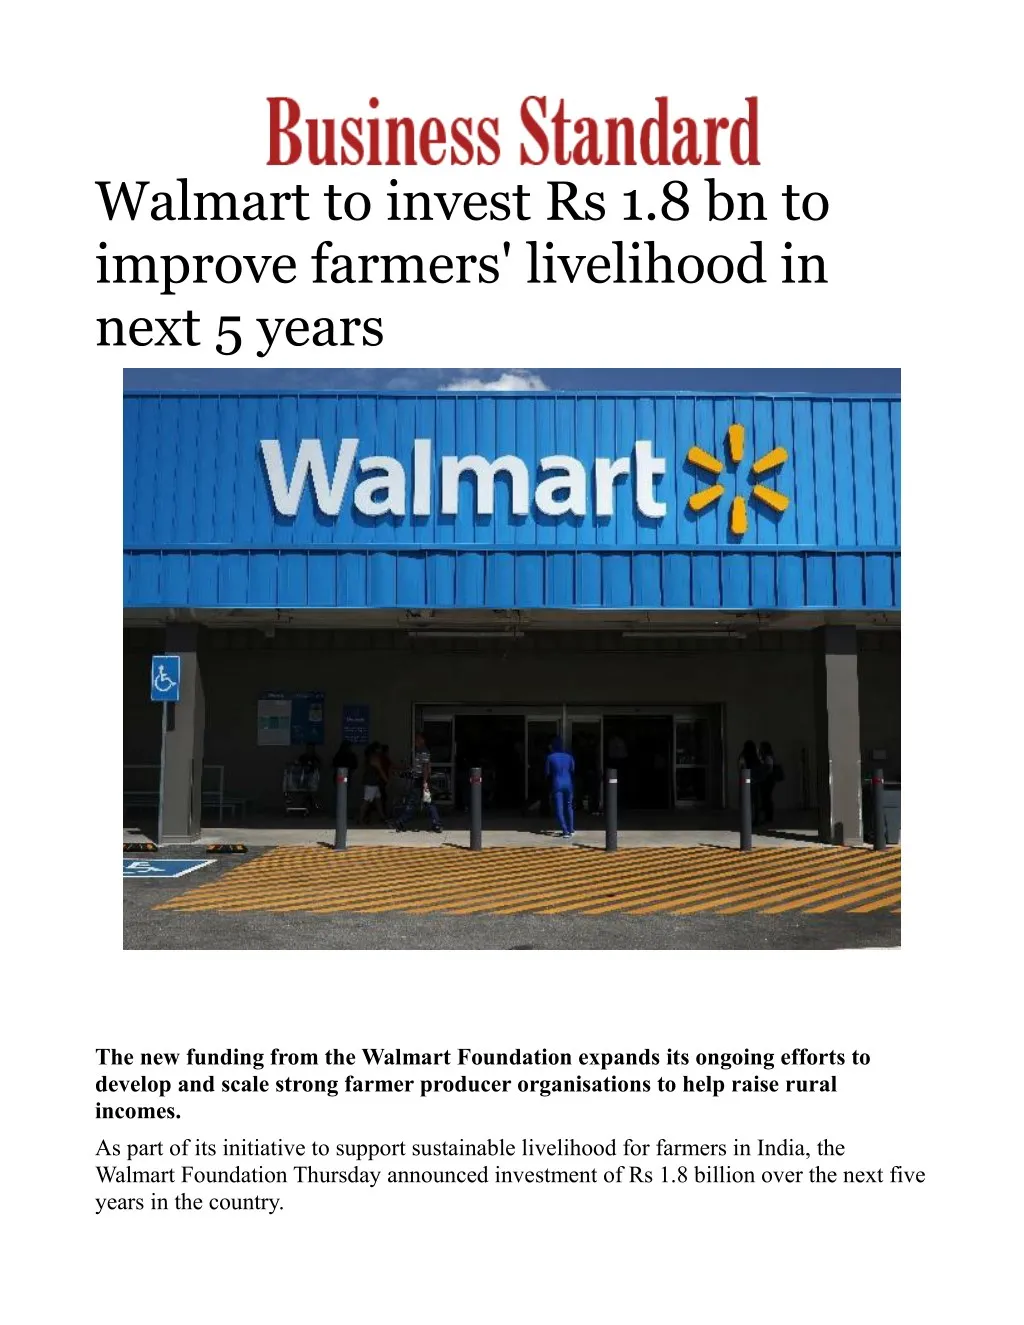 walmart to invest rs 1 8 bn to improve farmers